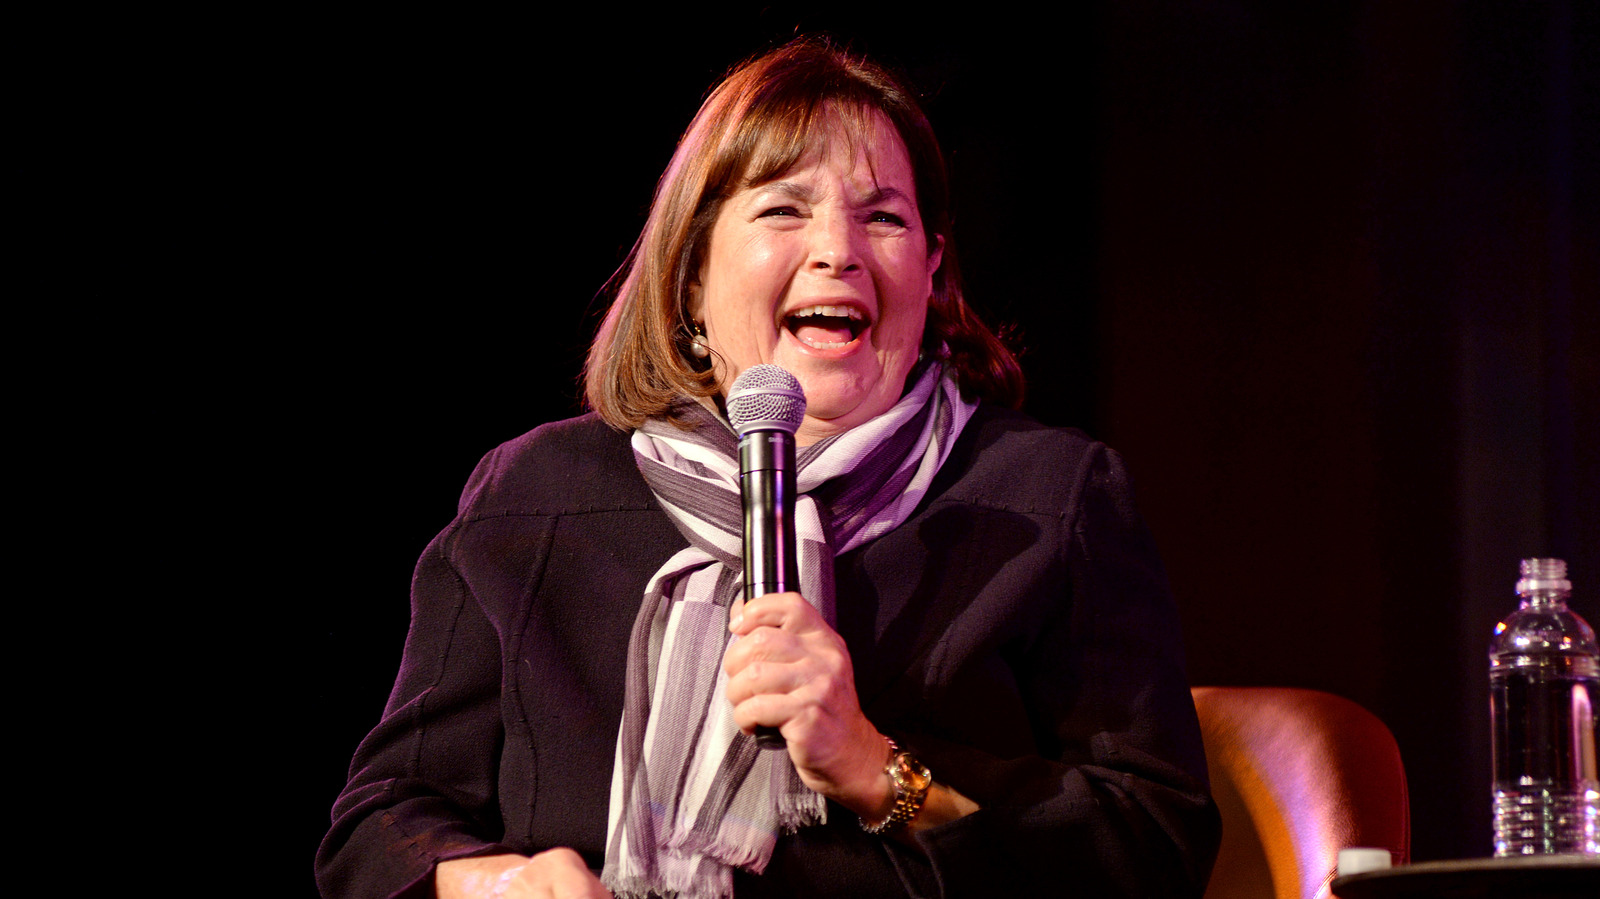 The Fast Food Spot Ina Garten Always Visits When She's On The West
Coast